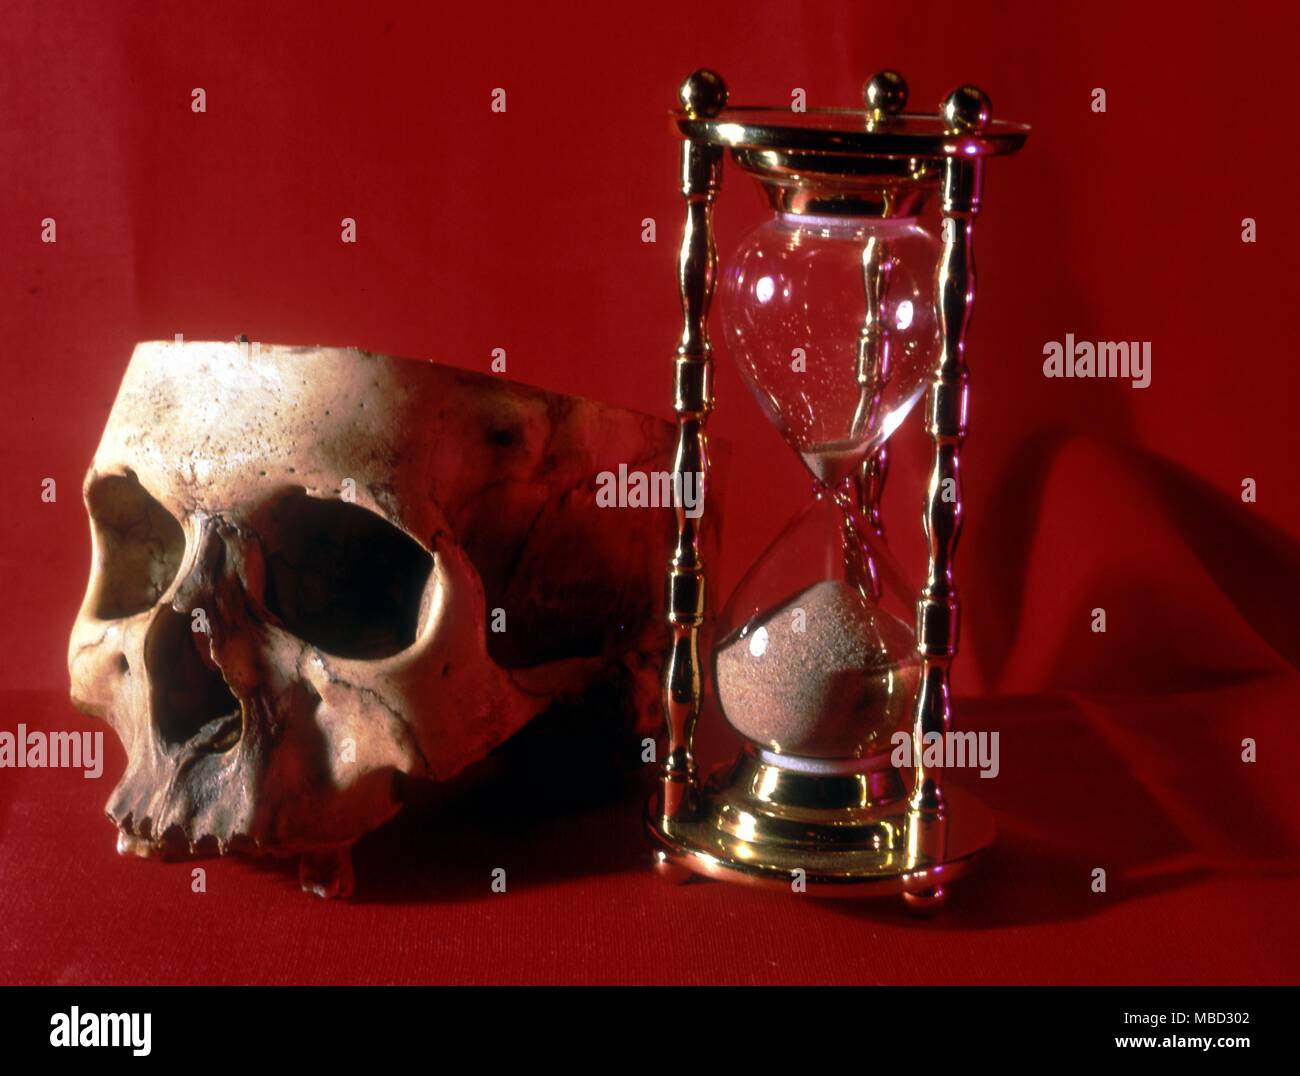 Emblem of mortality - the skull and the sands of time. Stock Photo